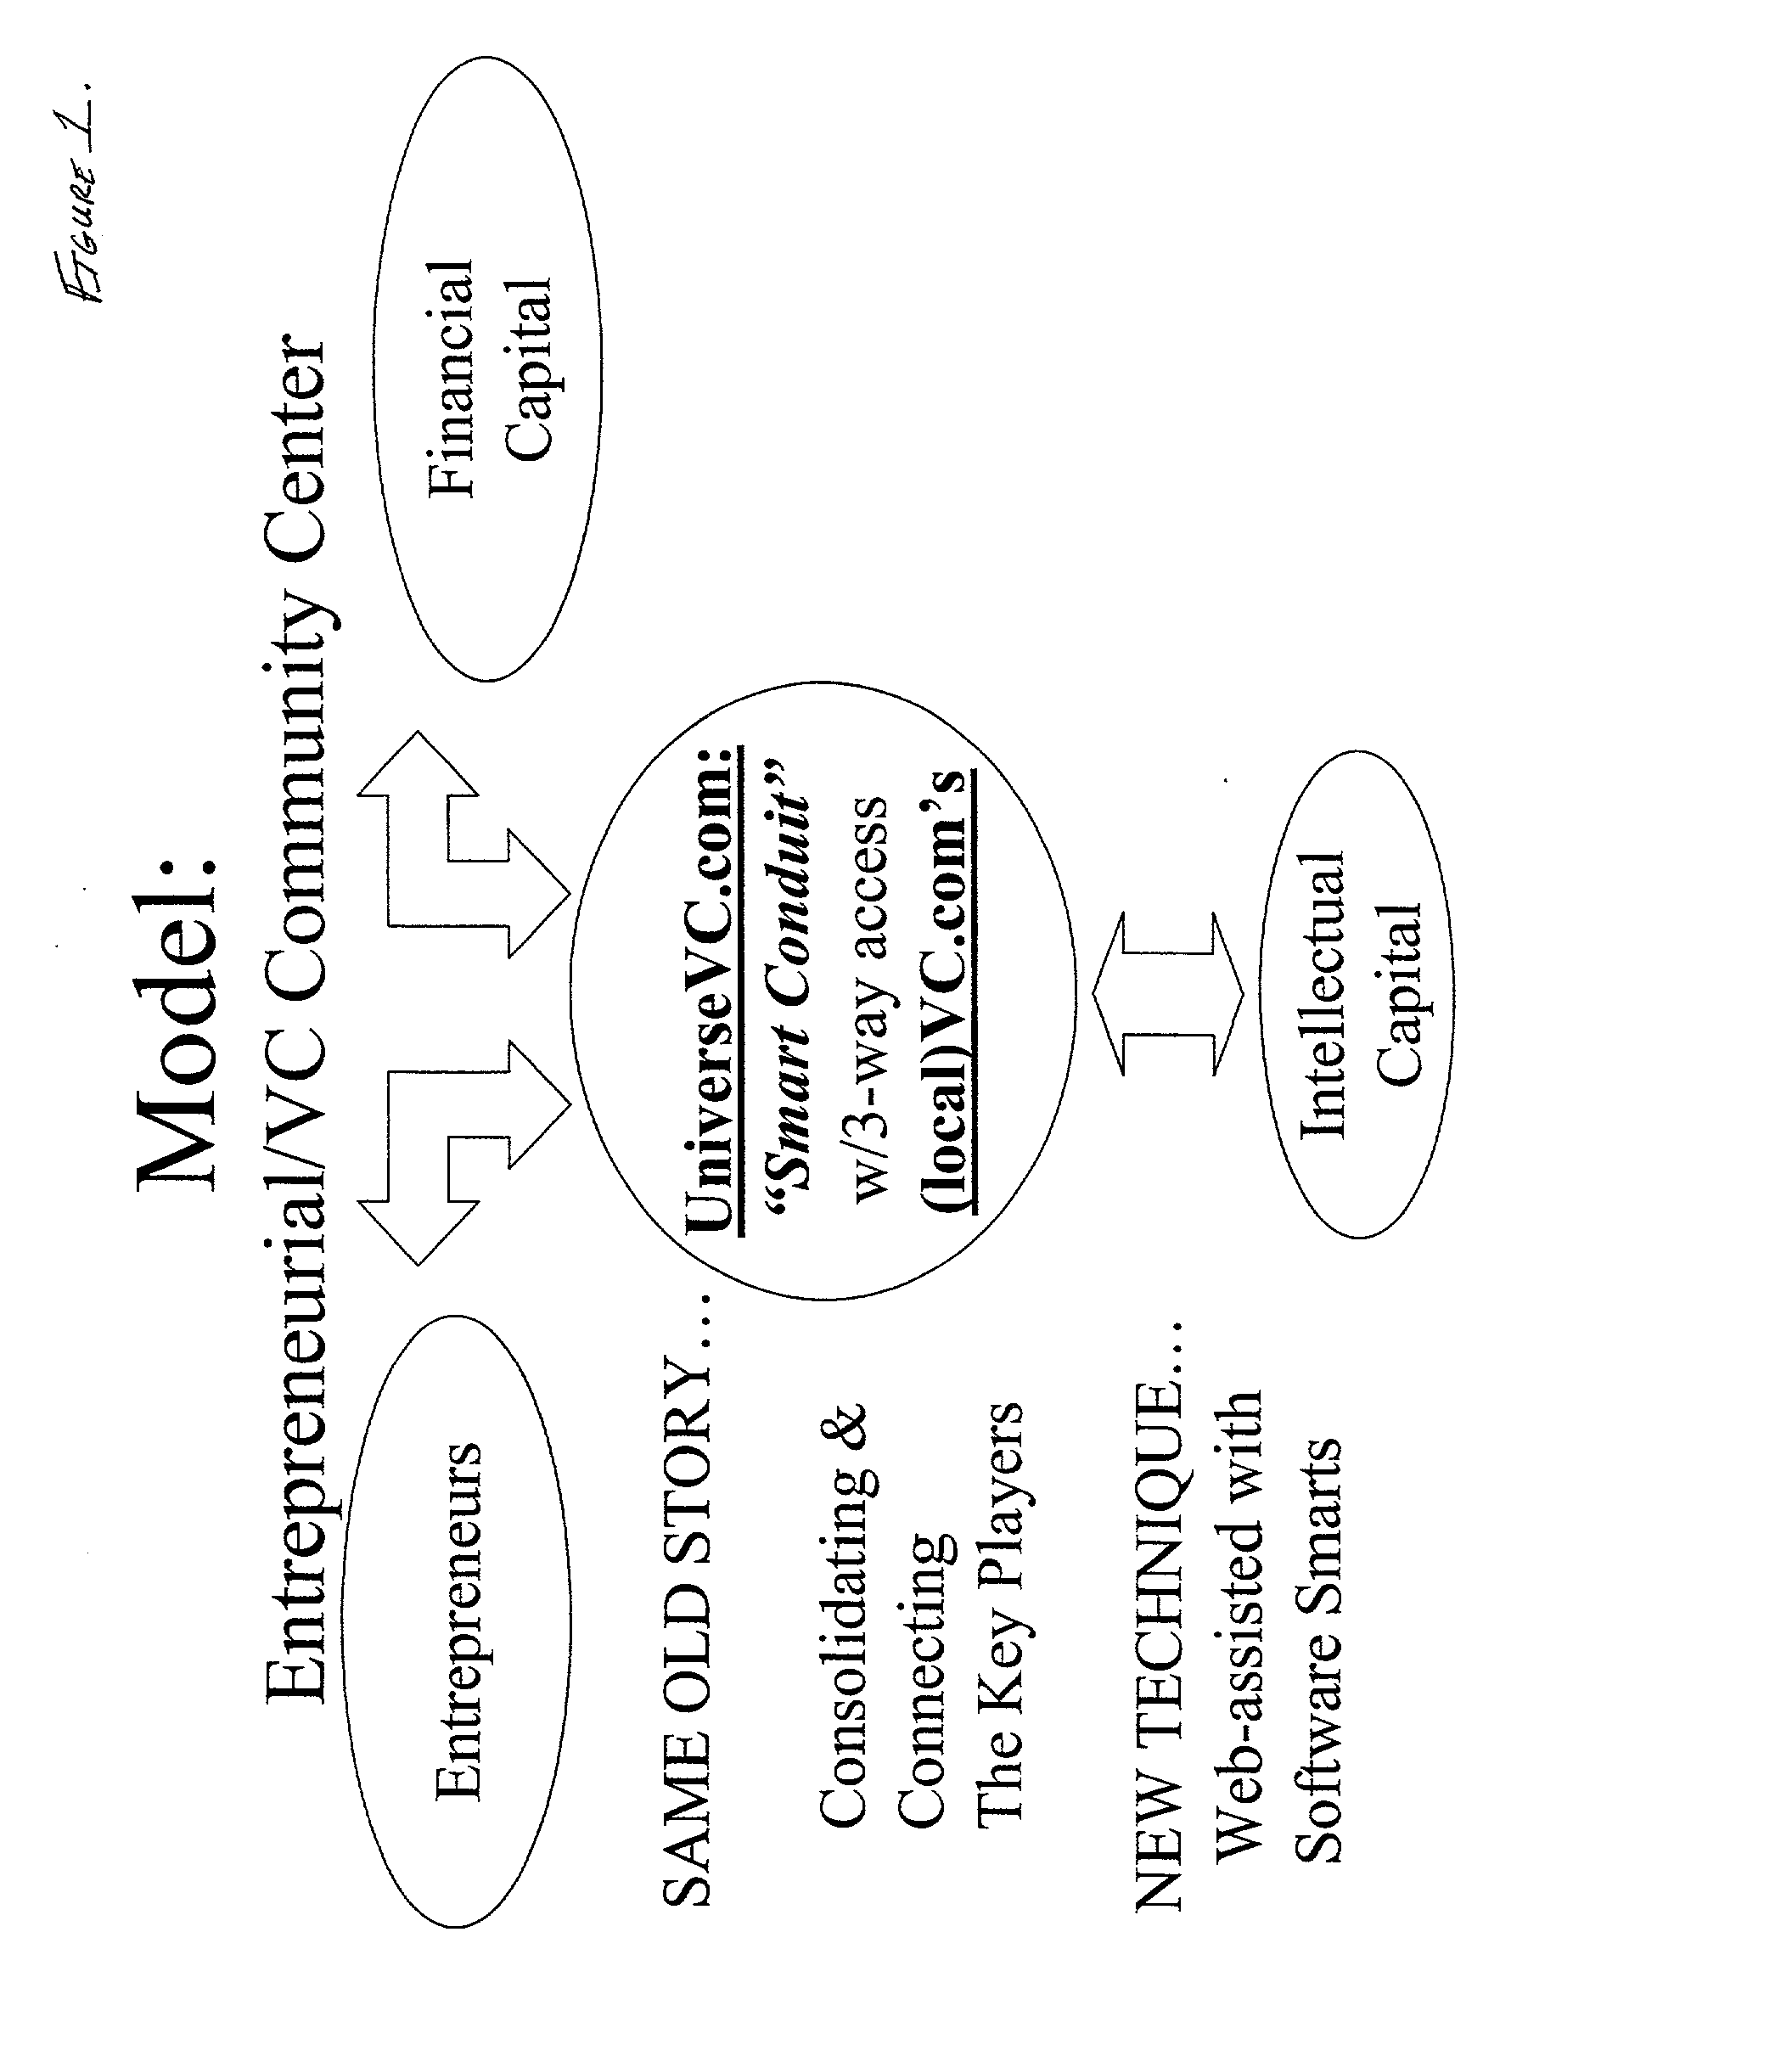 System and method for venture acceleration